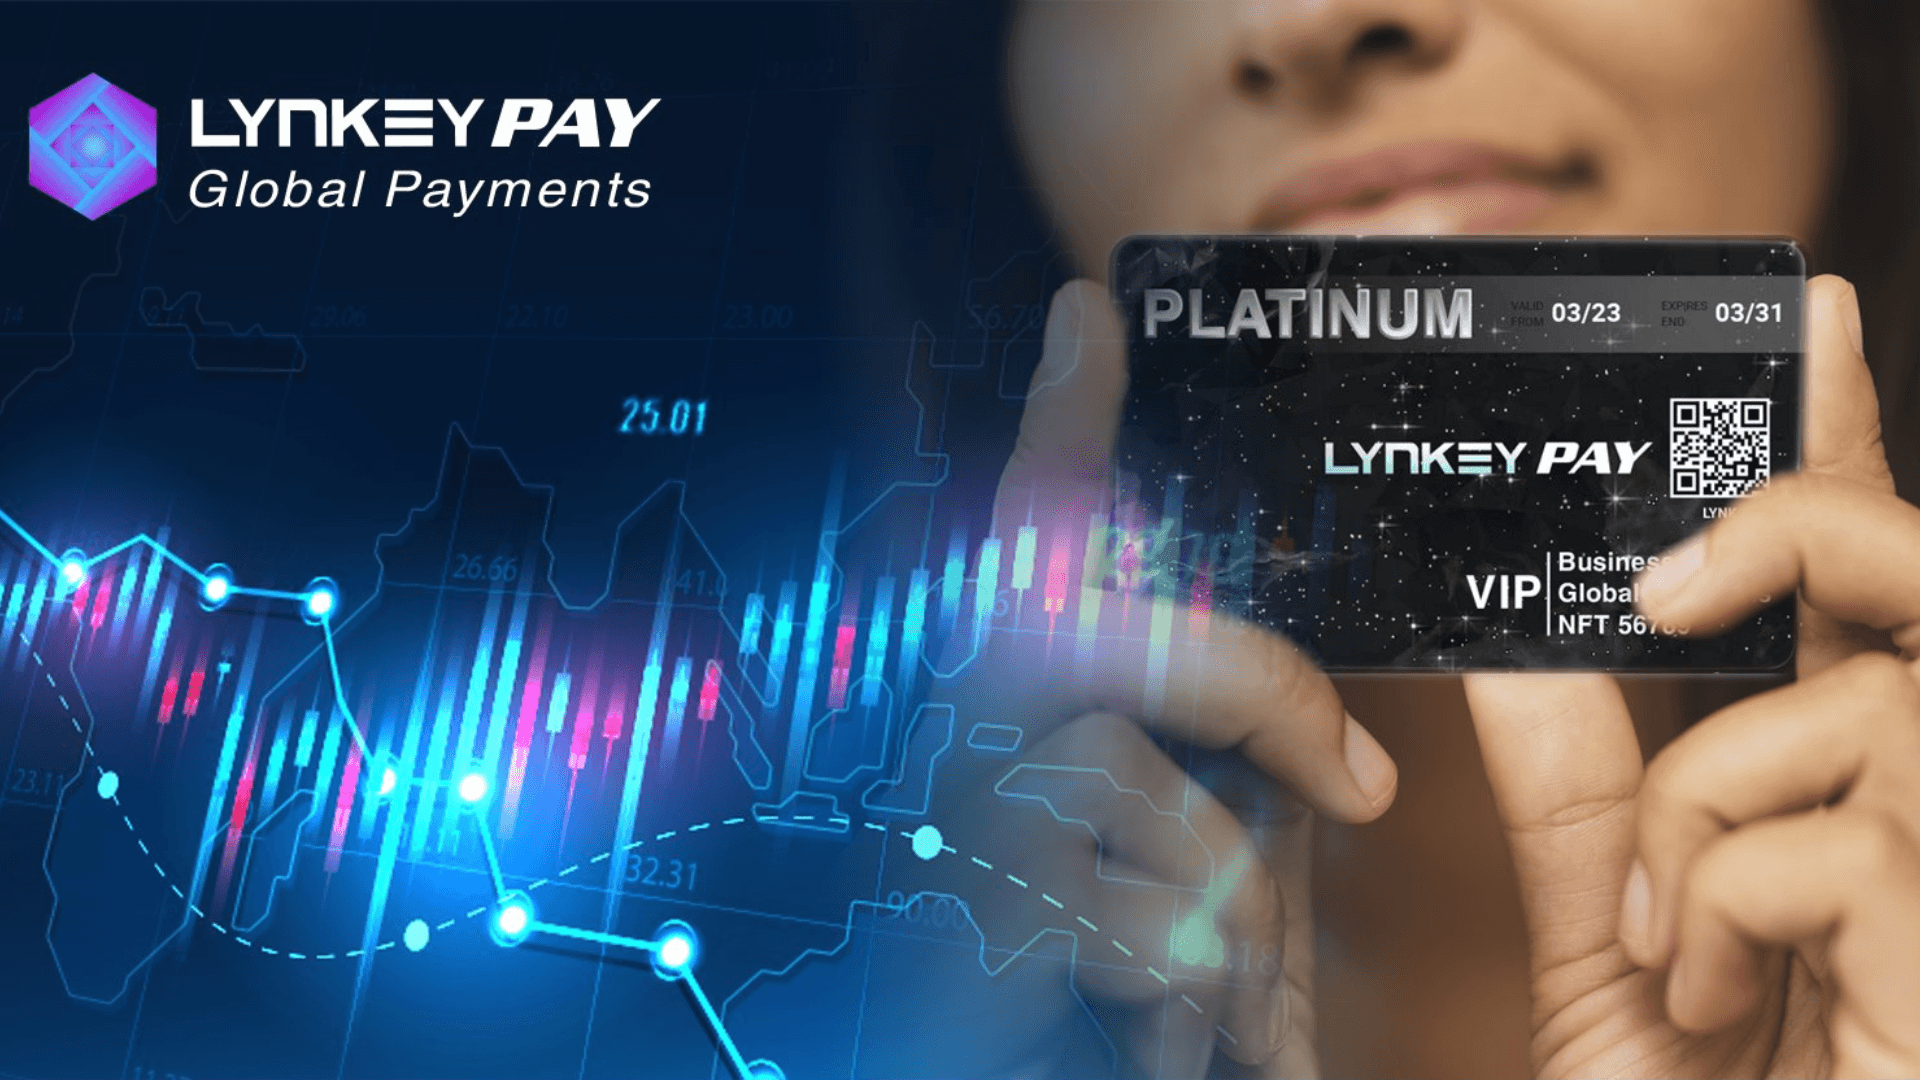 LynKey Introduces Its First Edition of LynKeyPay Card Collection